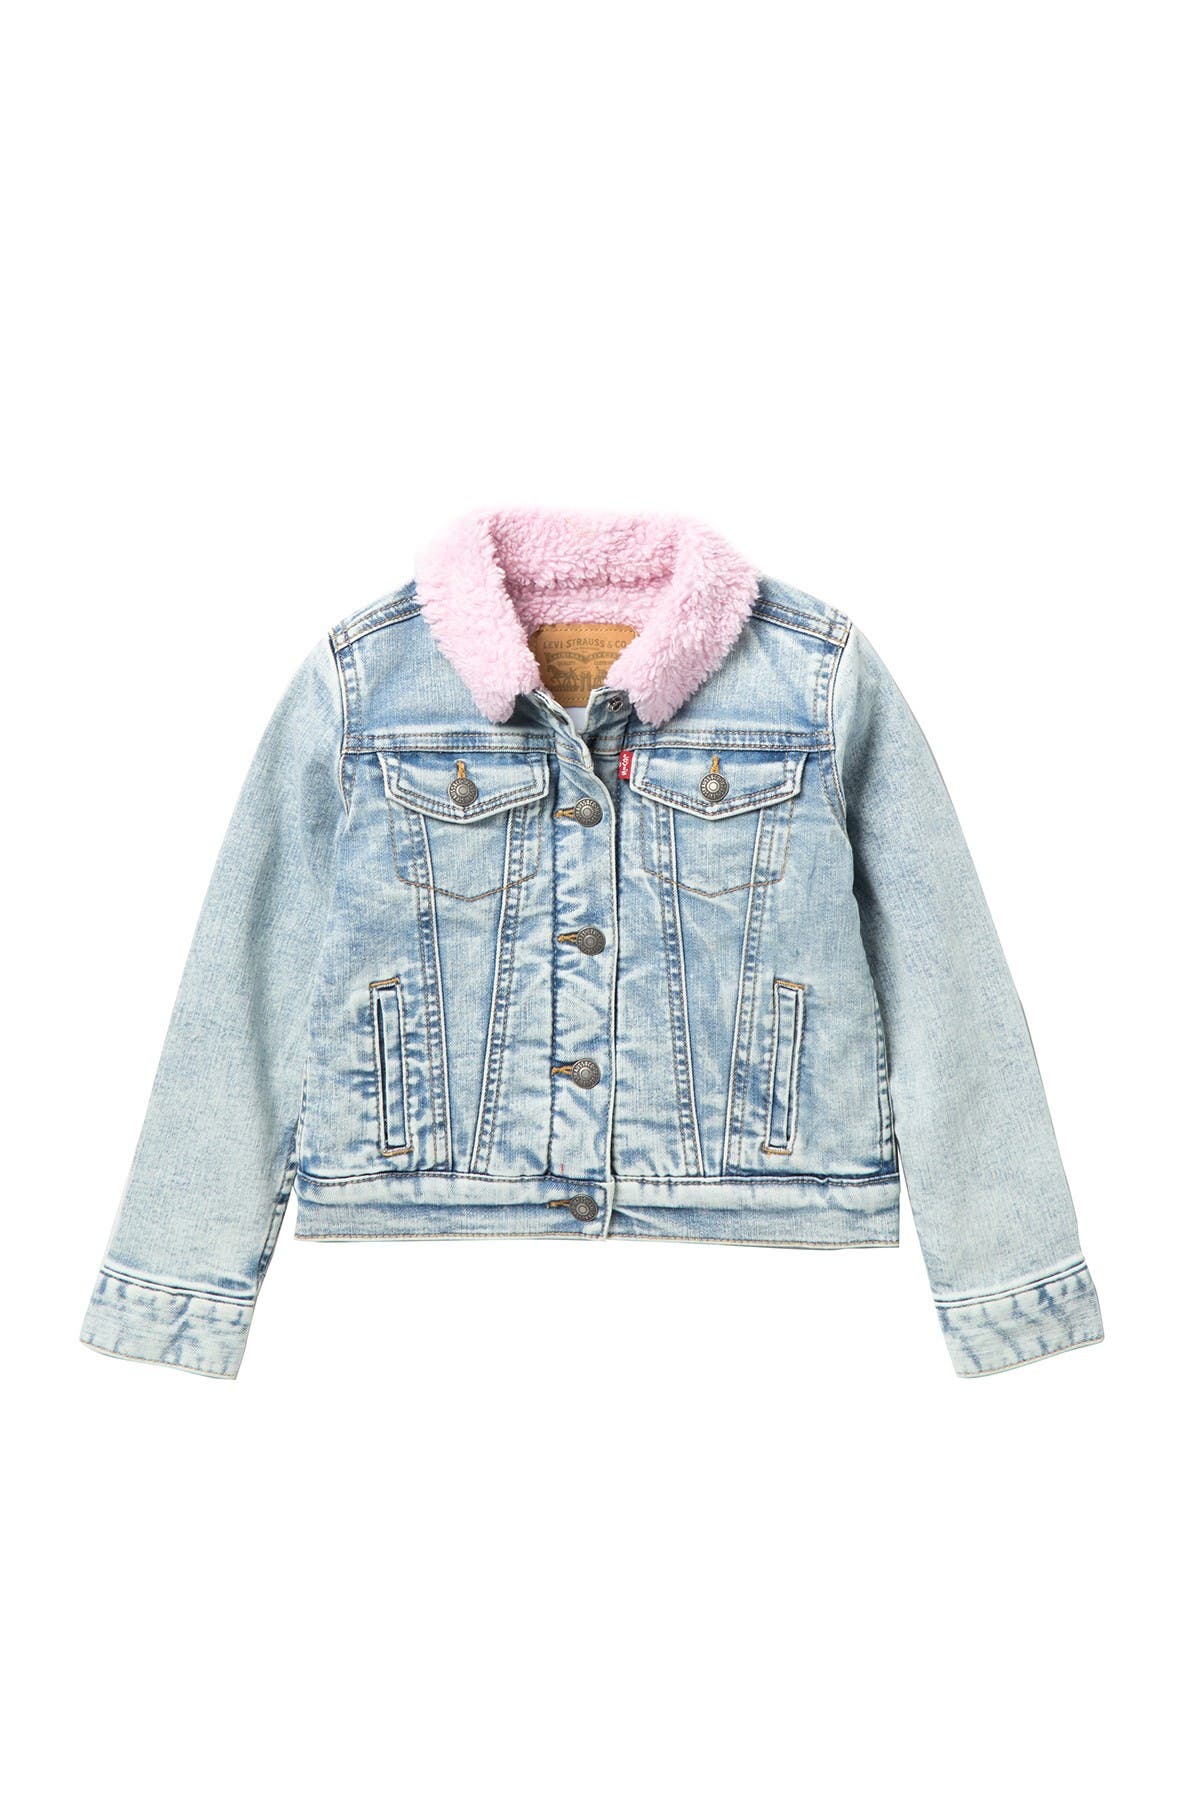 levi jackets for toddlers